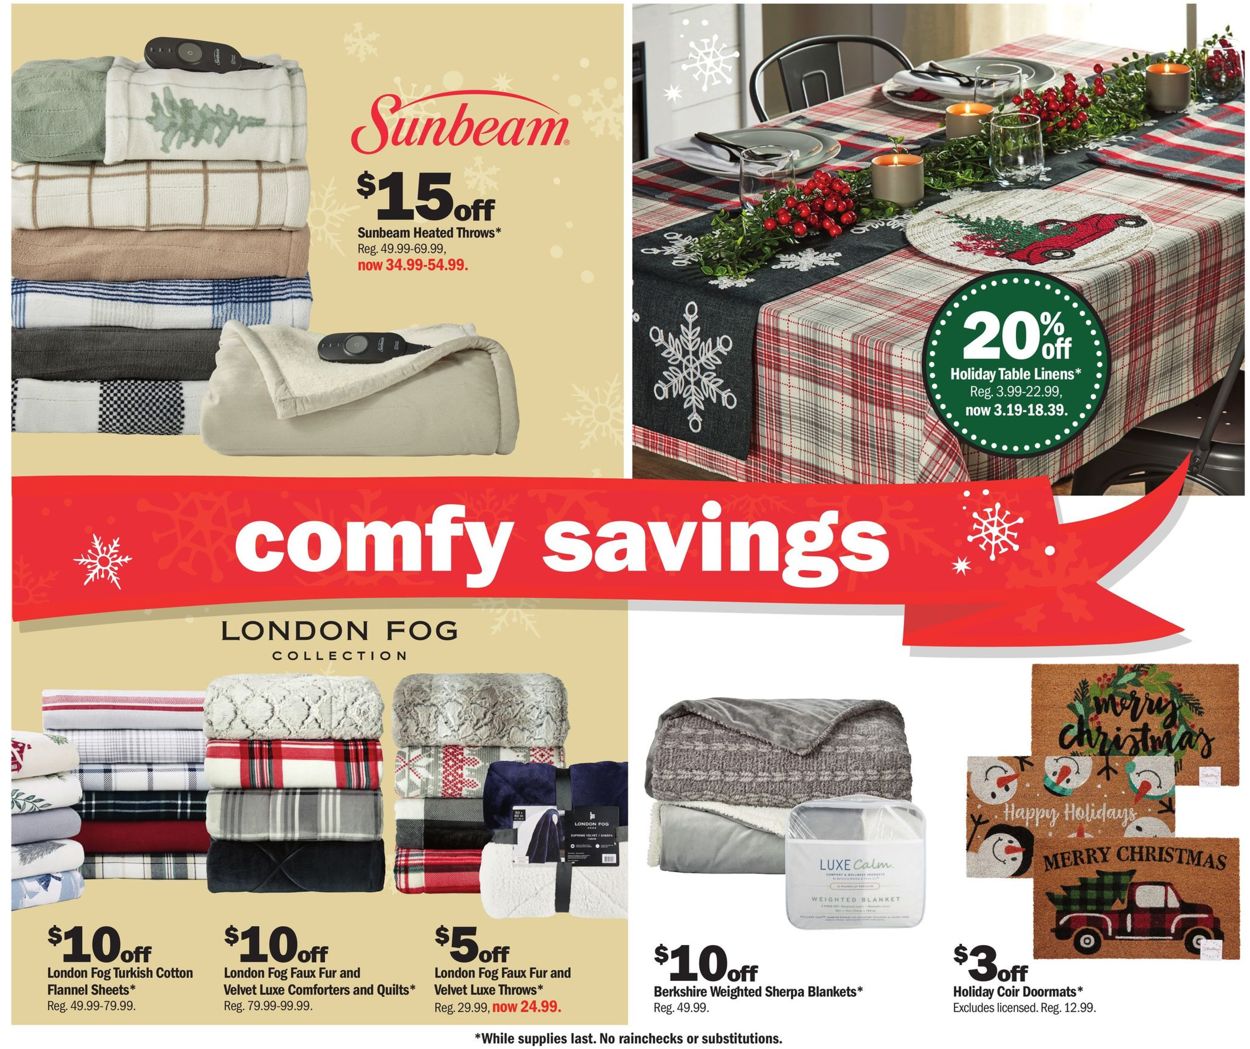 Meijer Ad from 11/28/2021